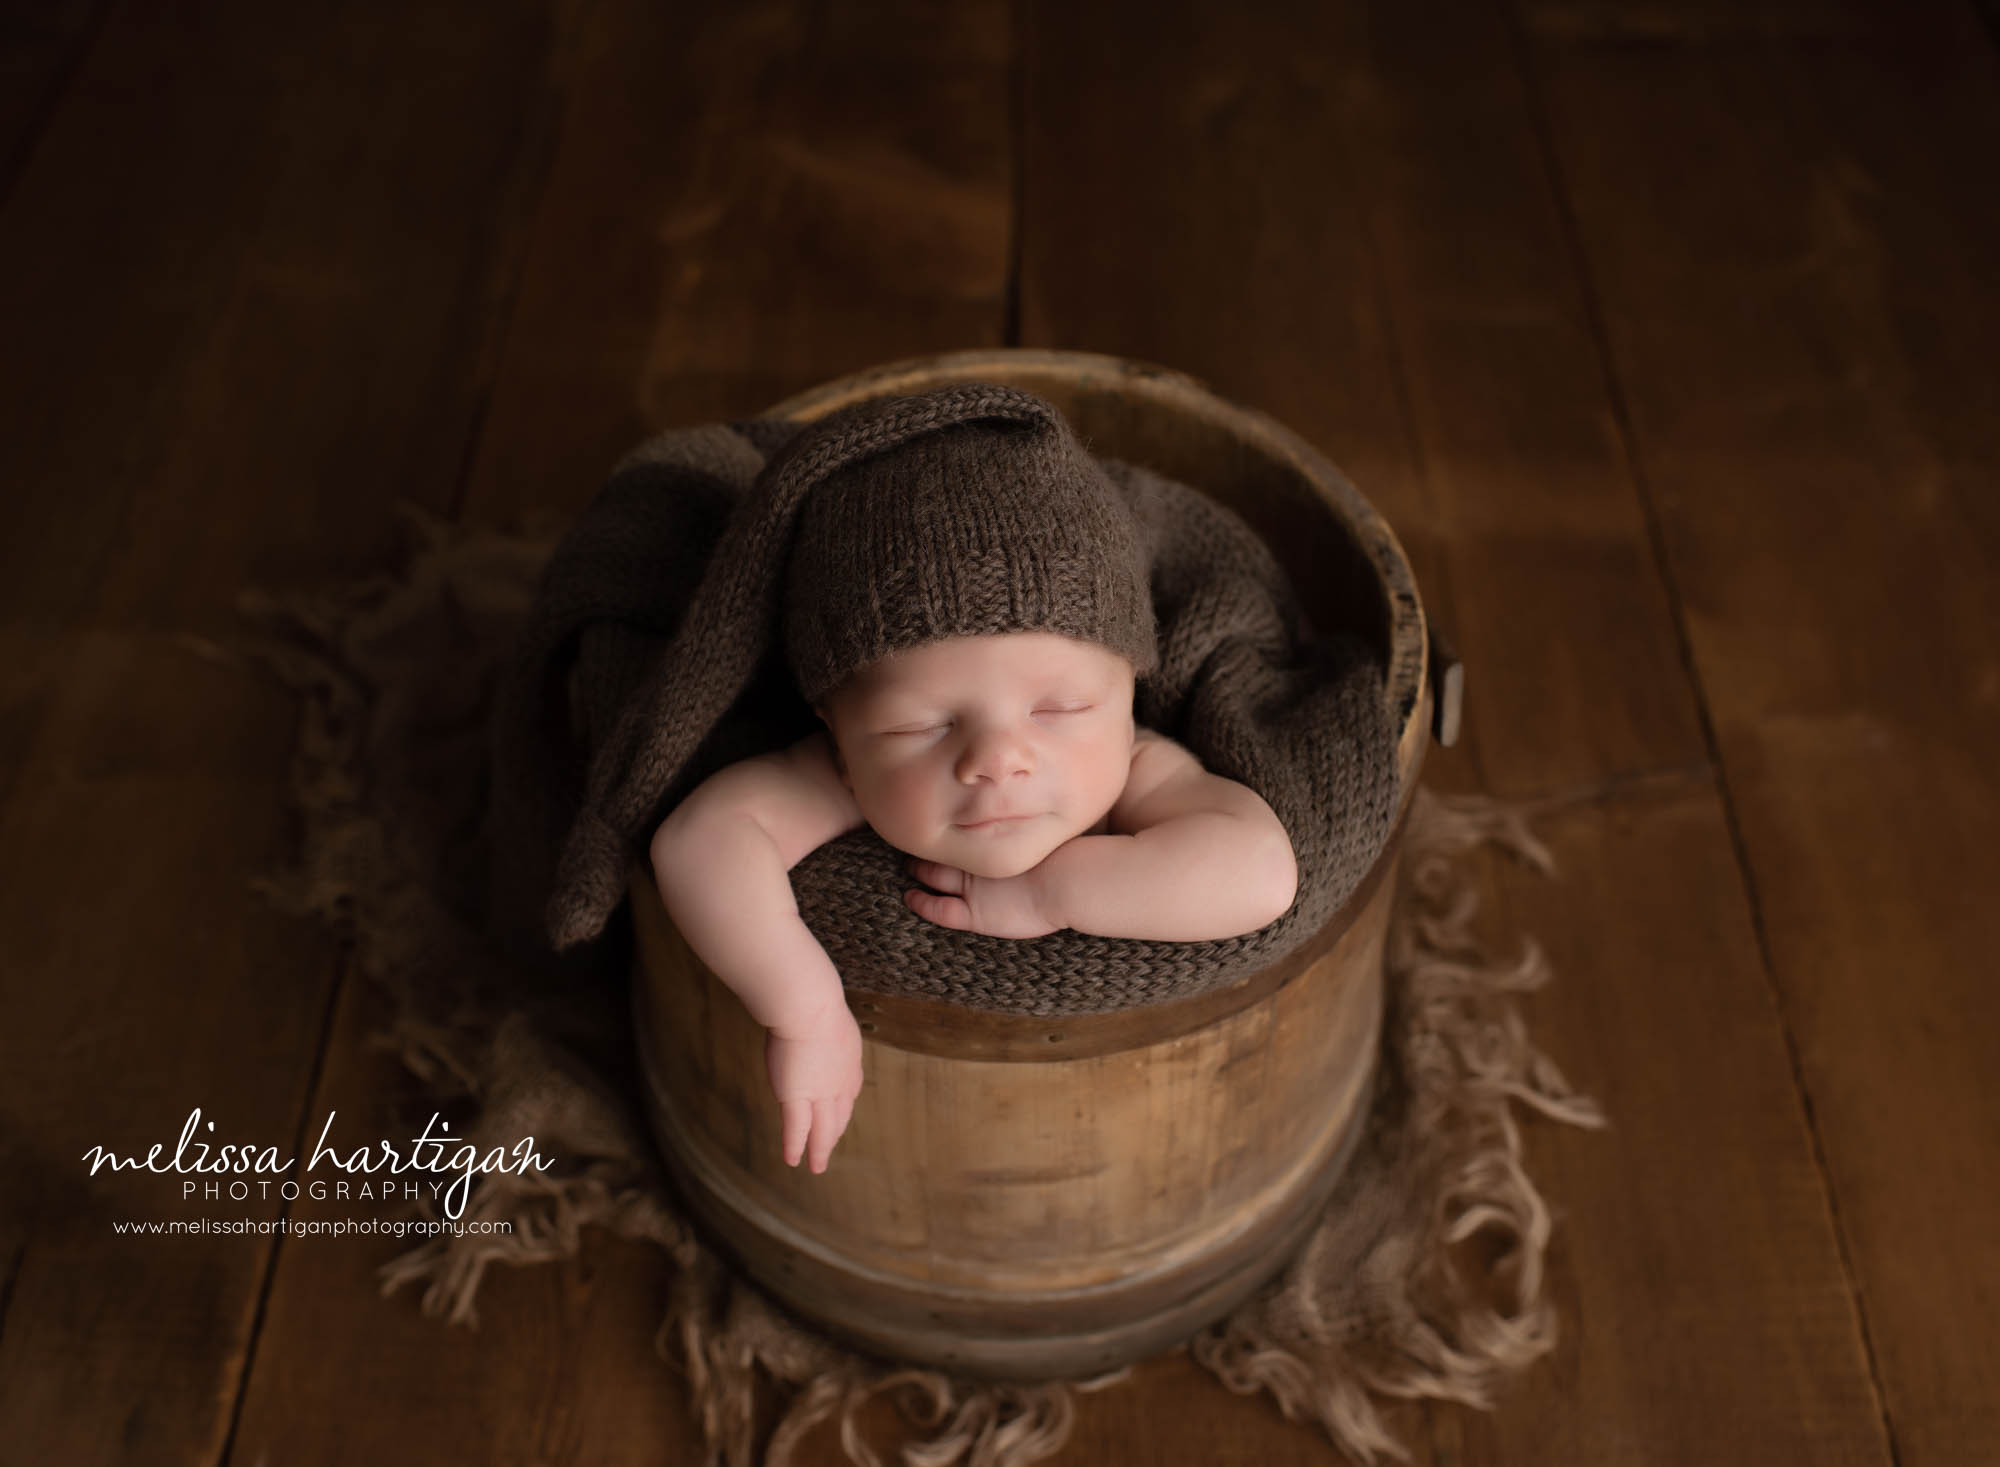 baby boy posed in rustic bucket with arm hanging down